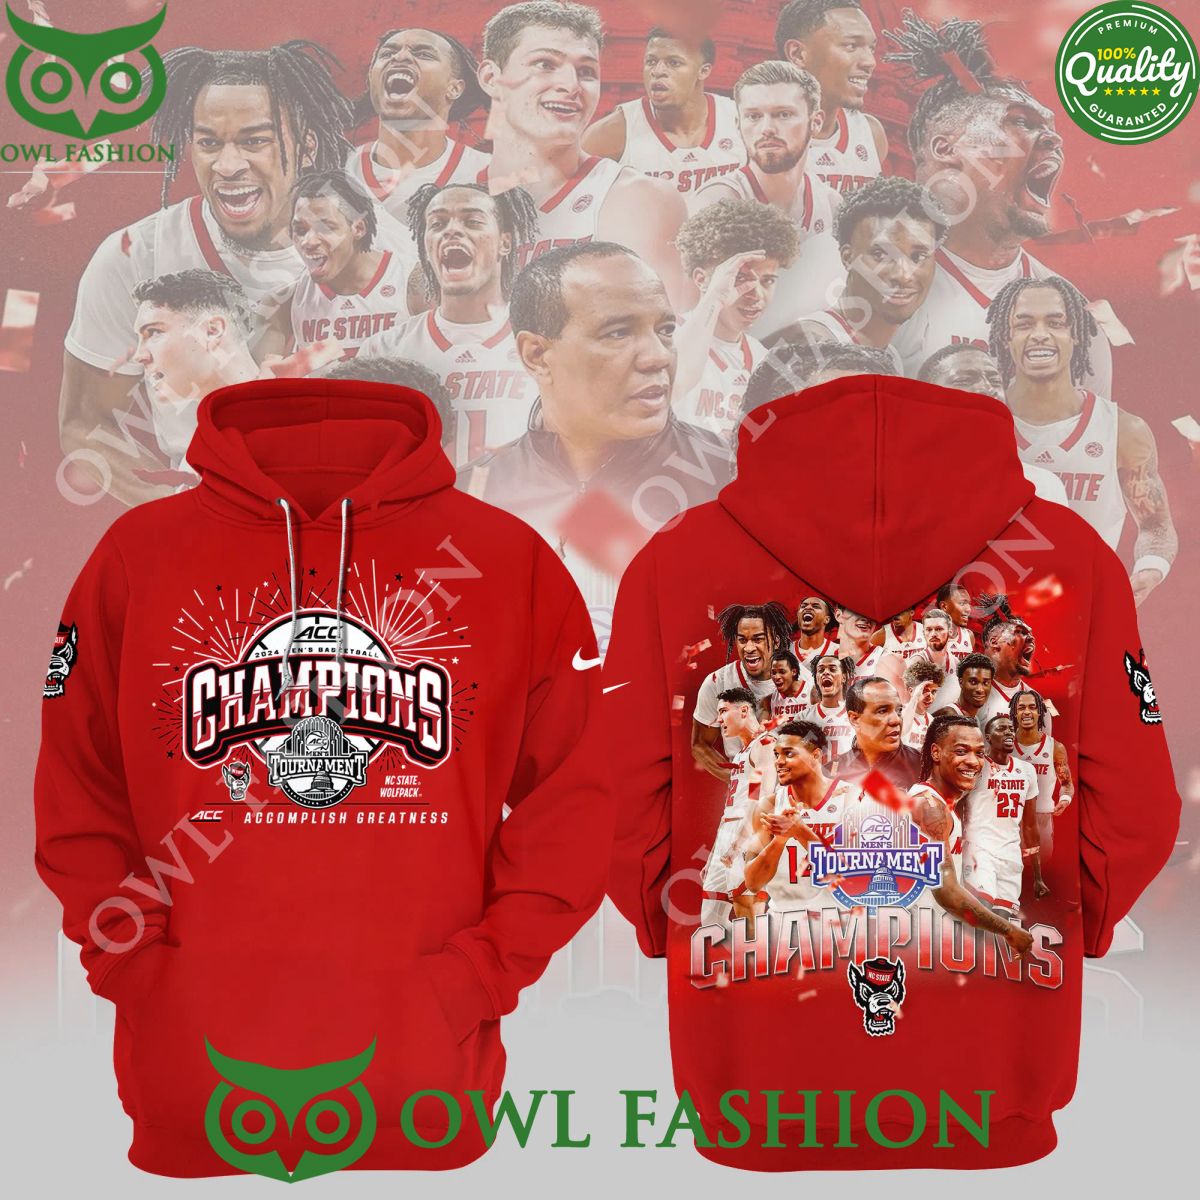 Accomplish Greatness NC State Wolfpack mens basketball ACC championship hoodie